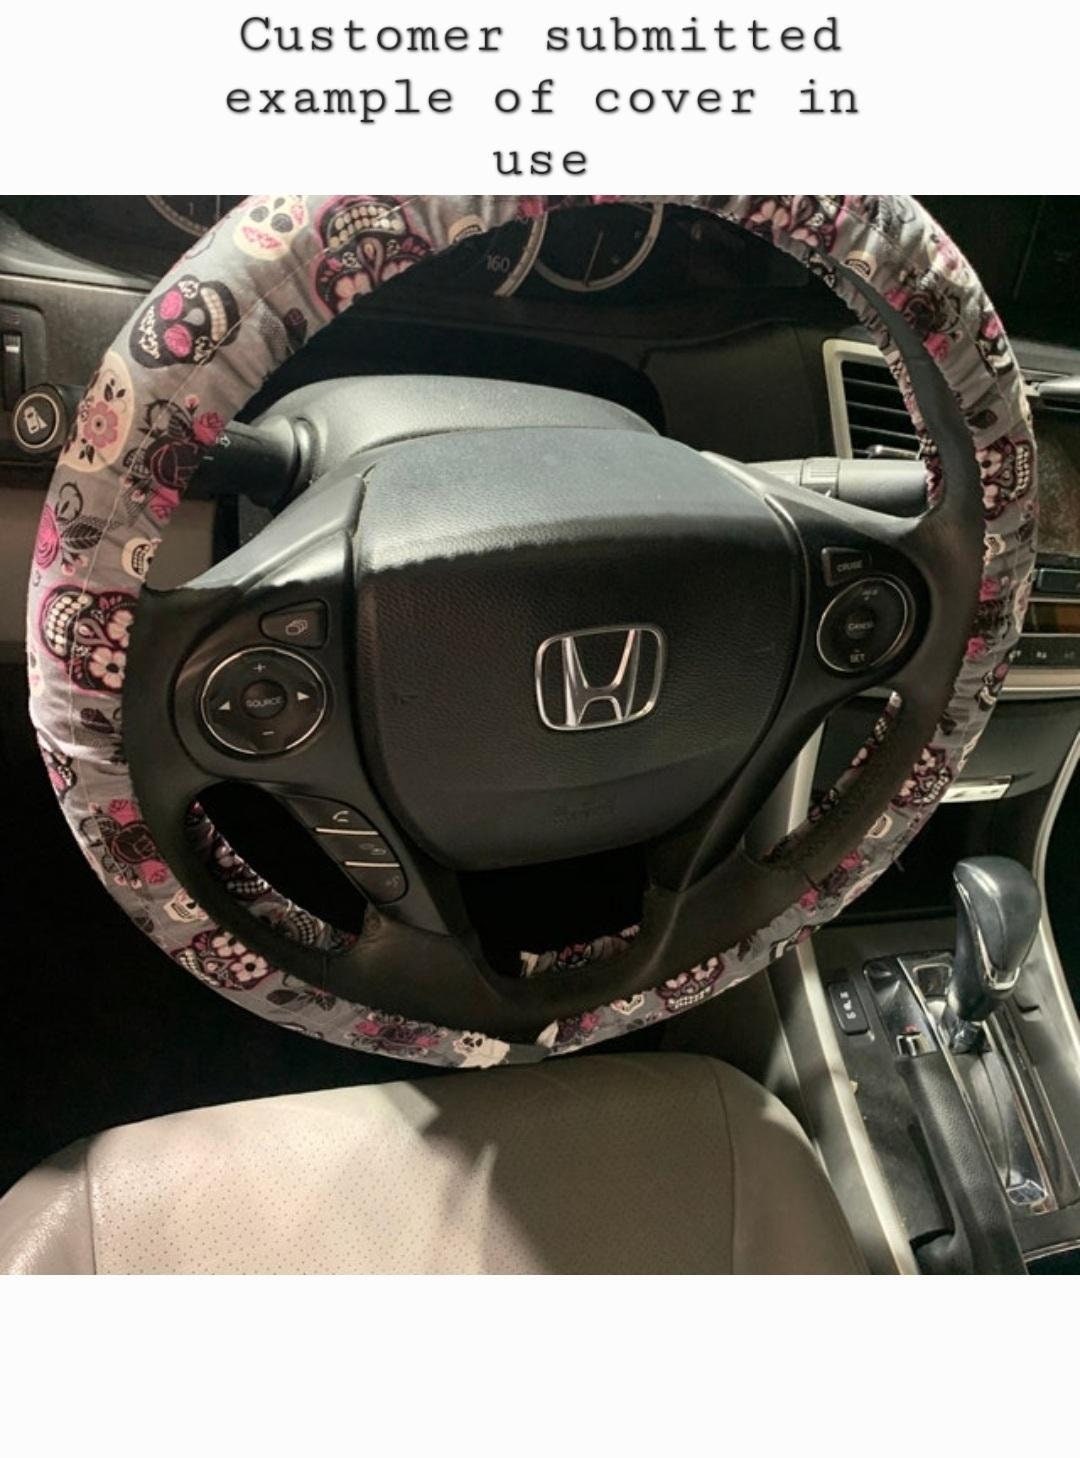 Jack NBC Steering Wheel Cover made with Licensed Disney Fabric, 100% Cotton, Washable, Car Accessories - Harlow's Store and Garden Gifts